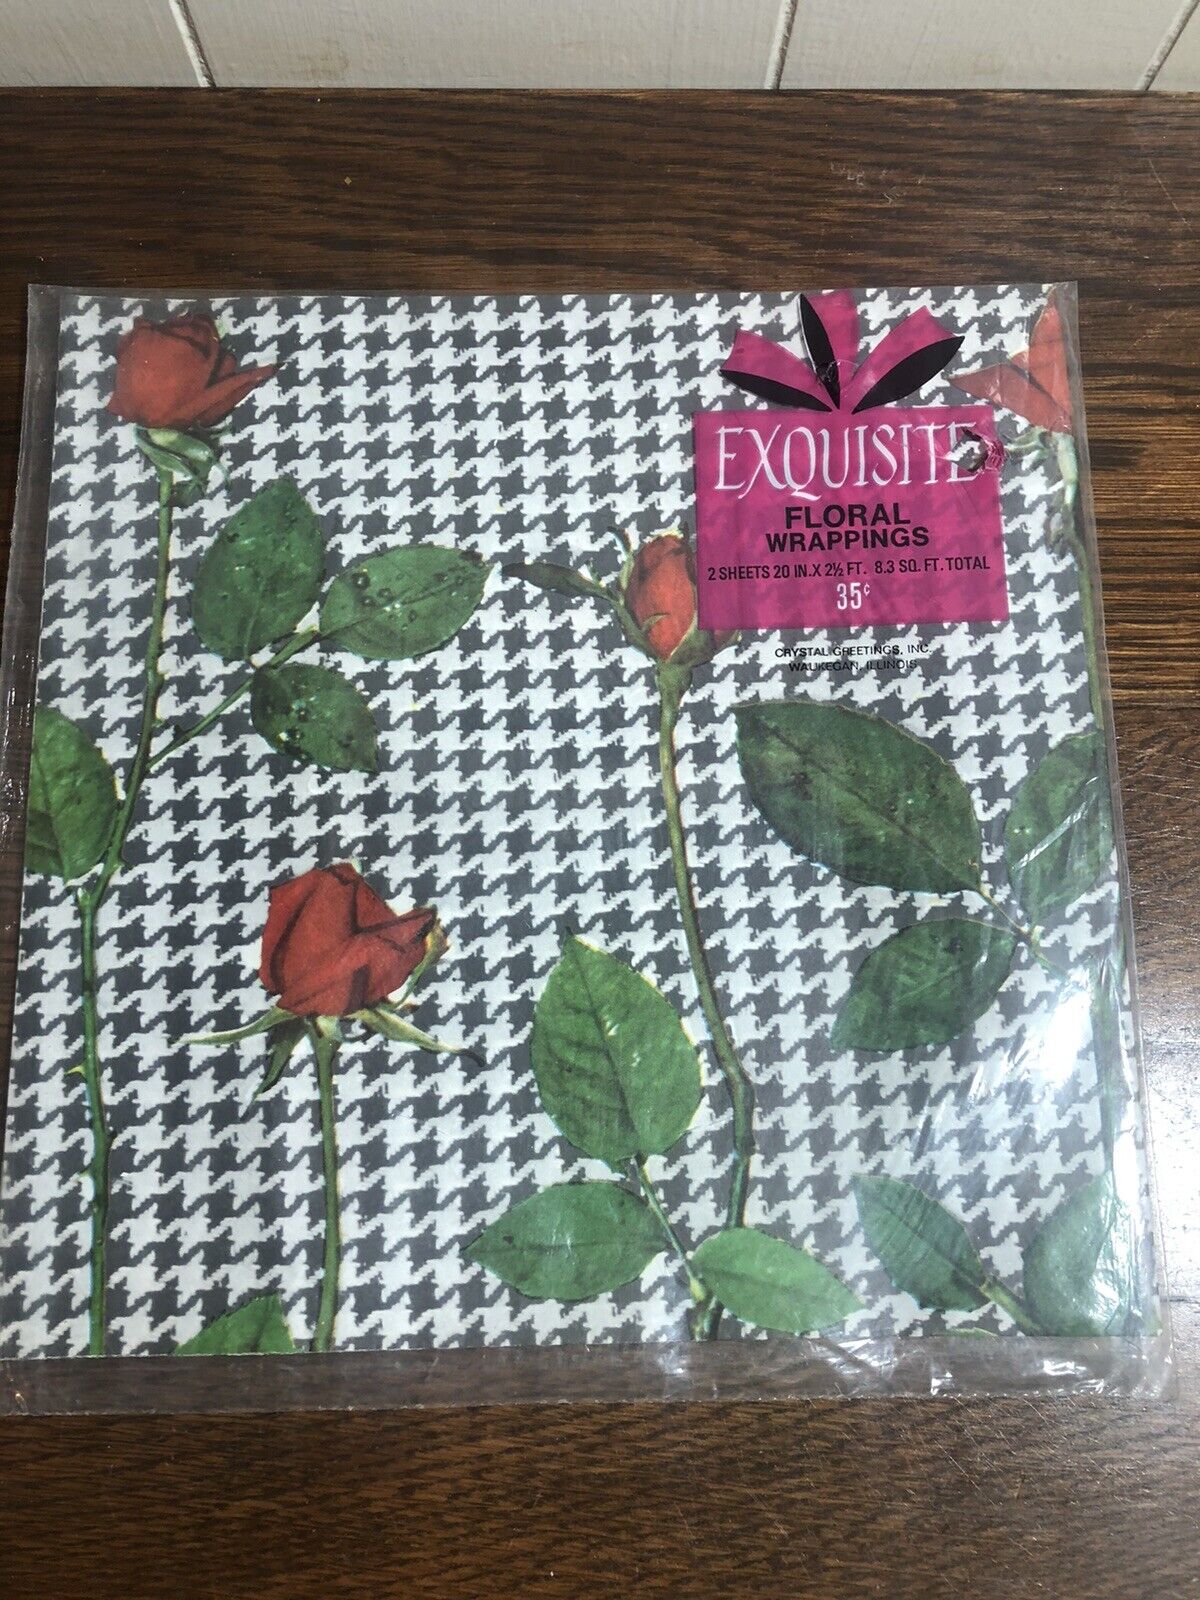 Vintage EXQUISITE Floral Wrappings Red Rose/Houndstooth 2 Sheets